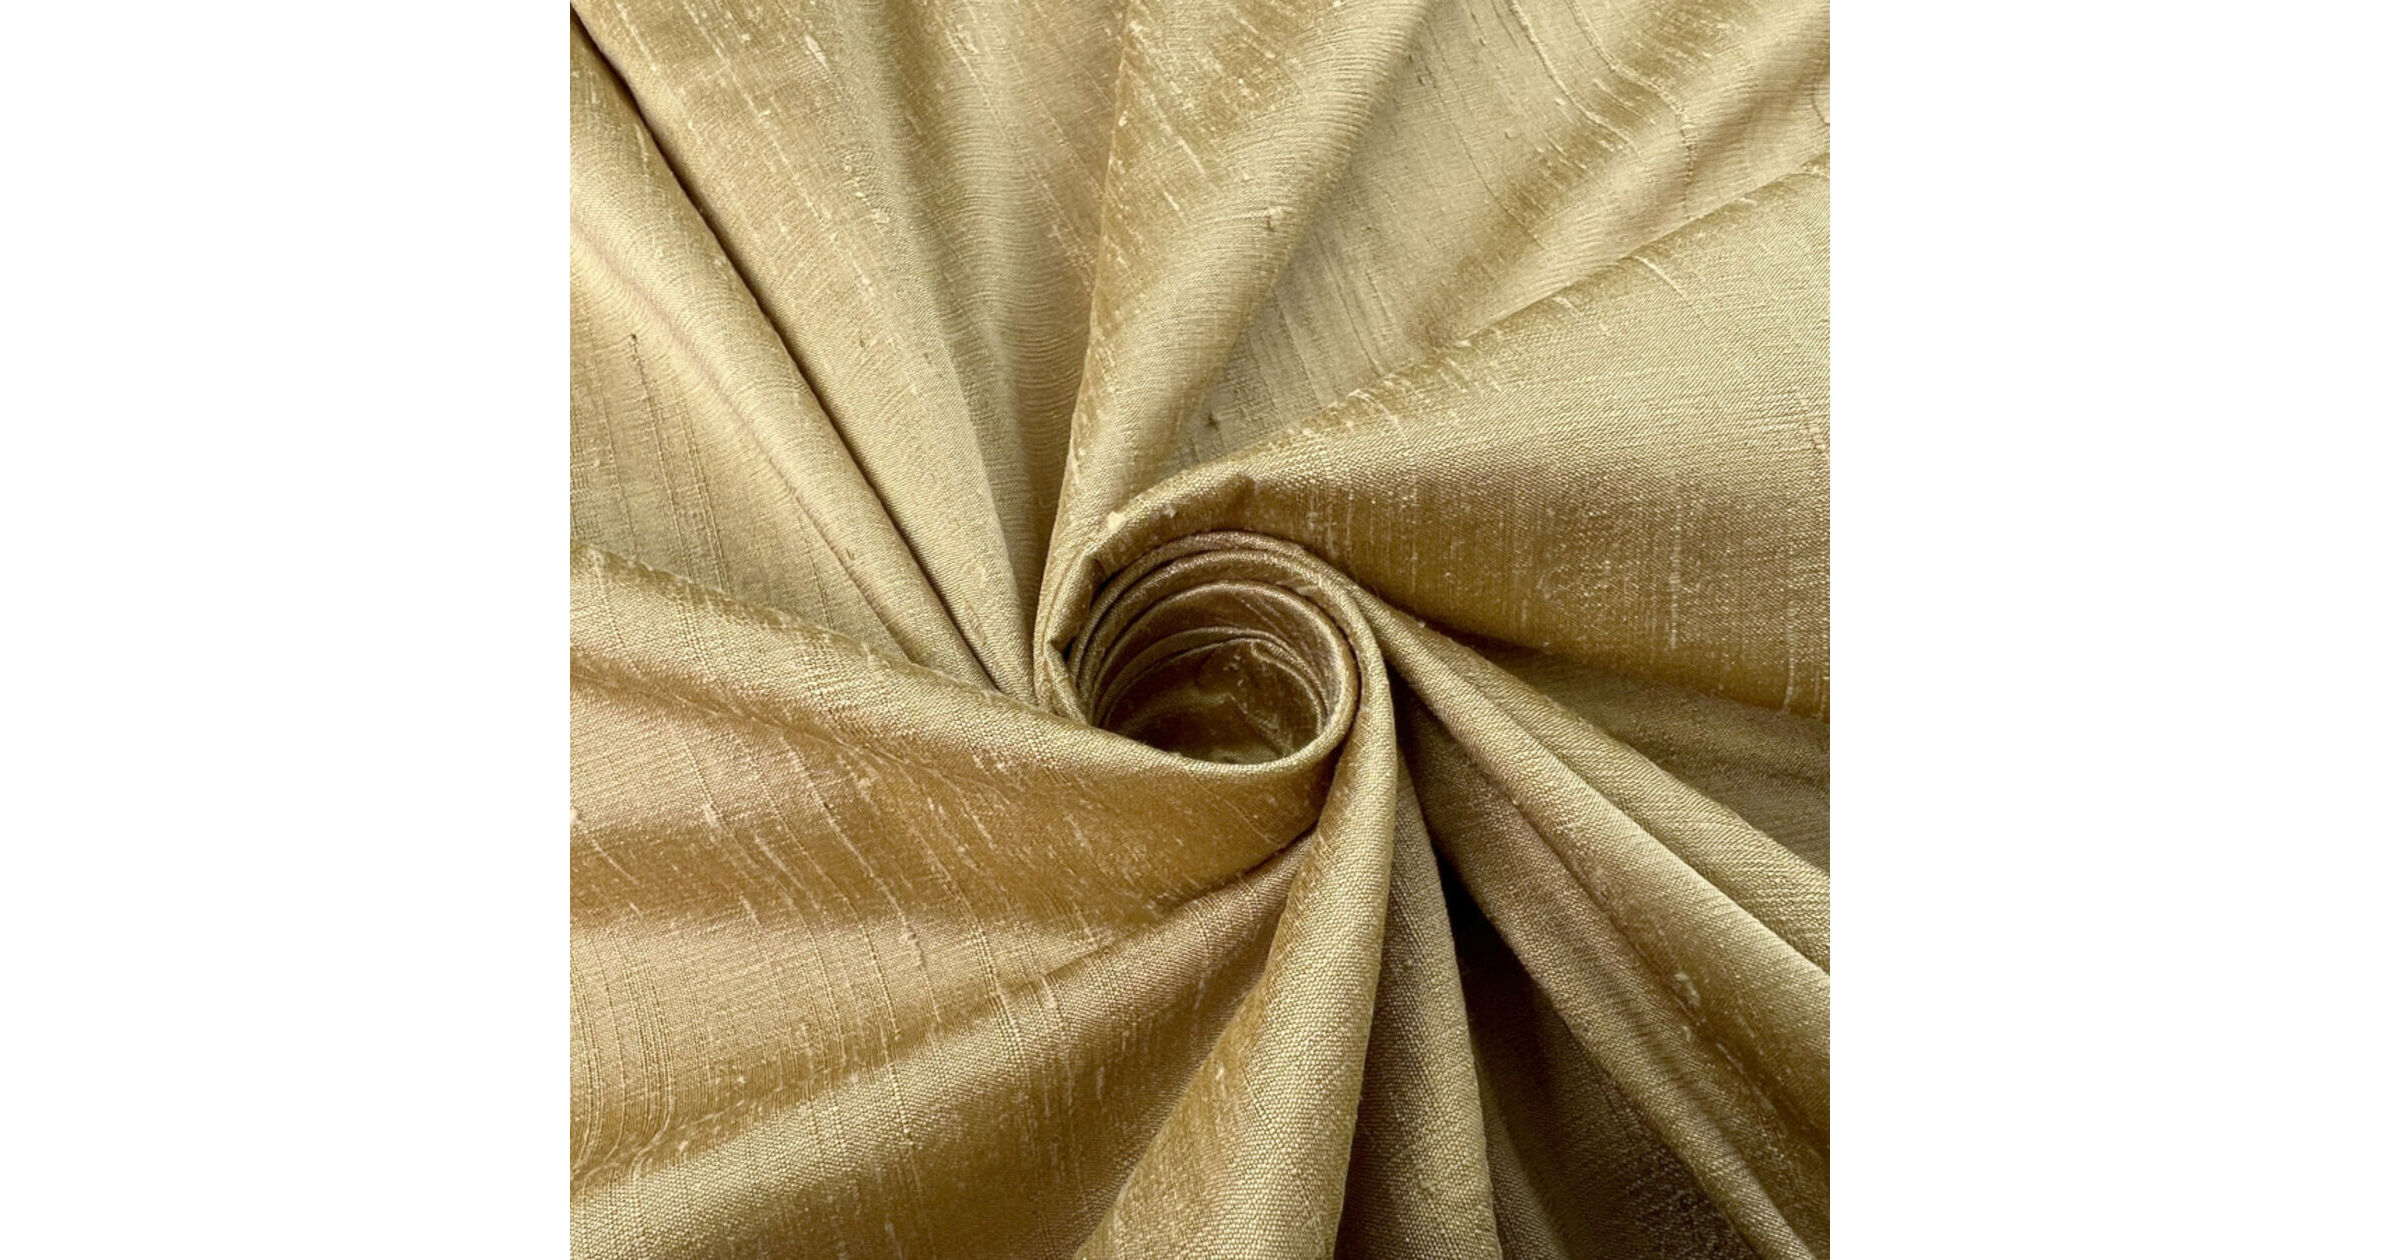  Fabric Mart Direct Golden Yellow 100% Pure Silk Fabric by The  Yard, 41 inches or 104 cm Width, 1 Continuous Yard Gold Silk Fabric, Pure  Silk Dupioni Bridal Dress Upholstery Curtain